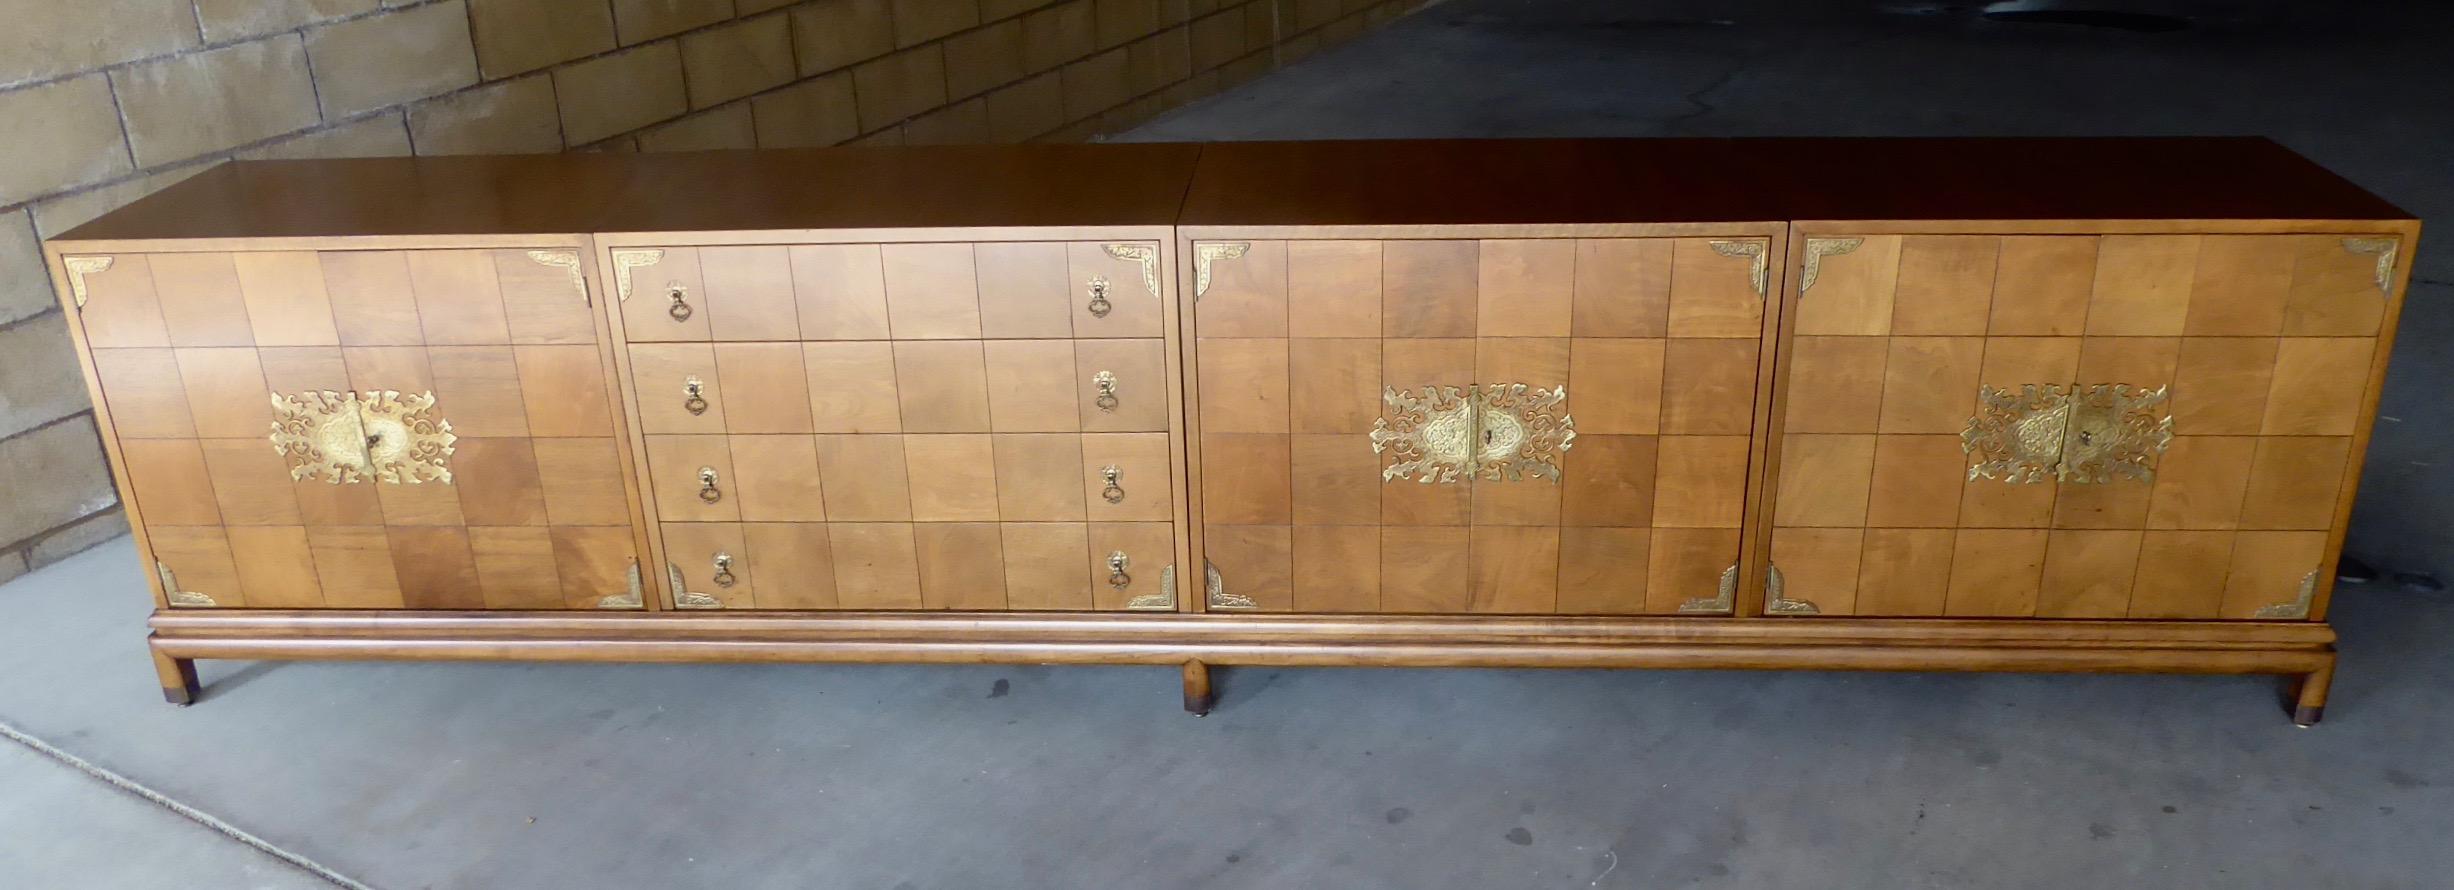 American Monumentally Scaled Midcentury Credenza Designed by Renzo Rutili, circa 1960 For Sale